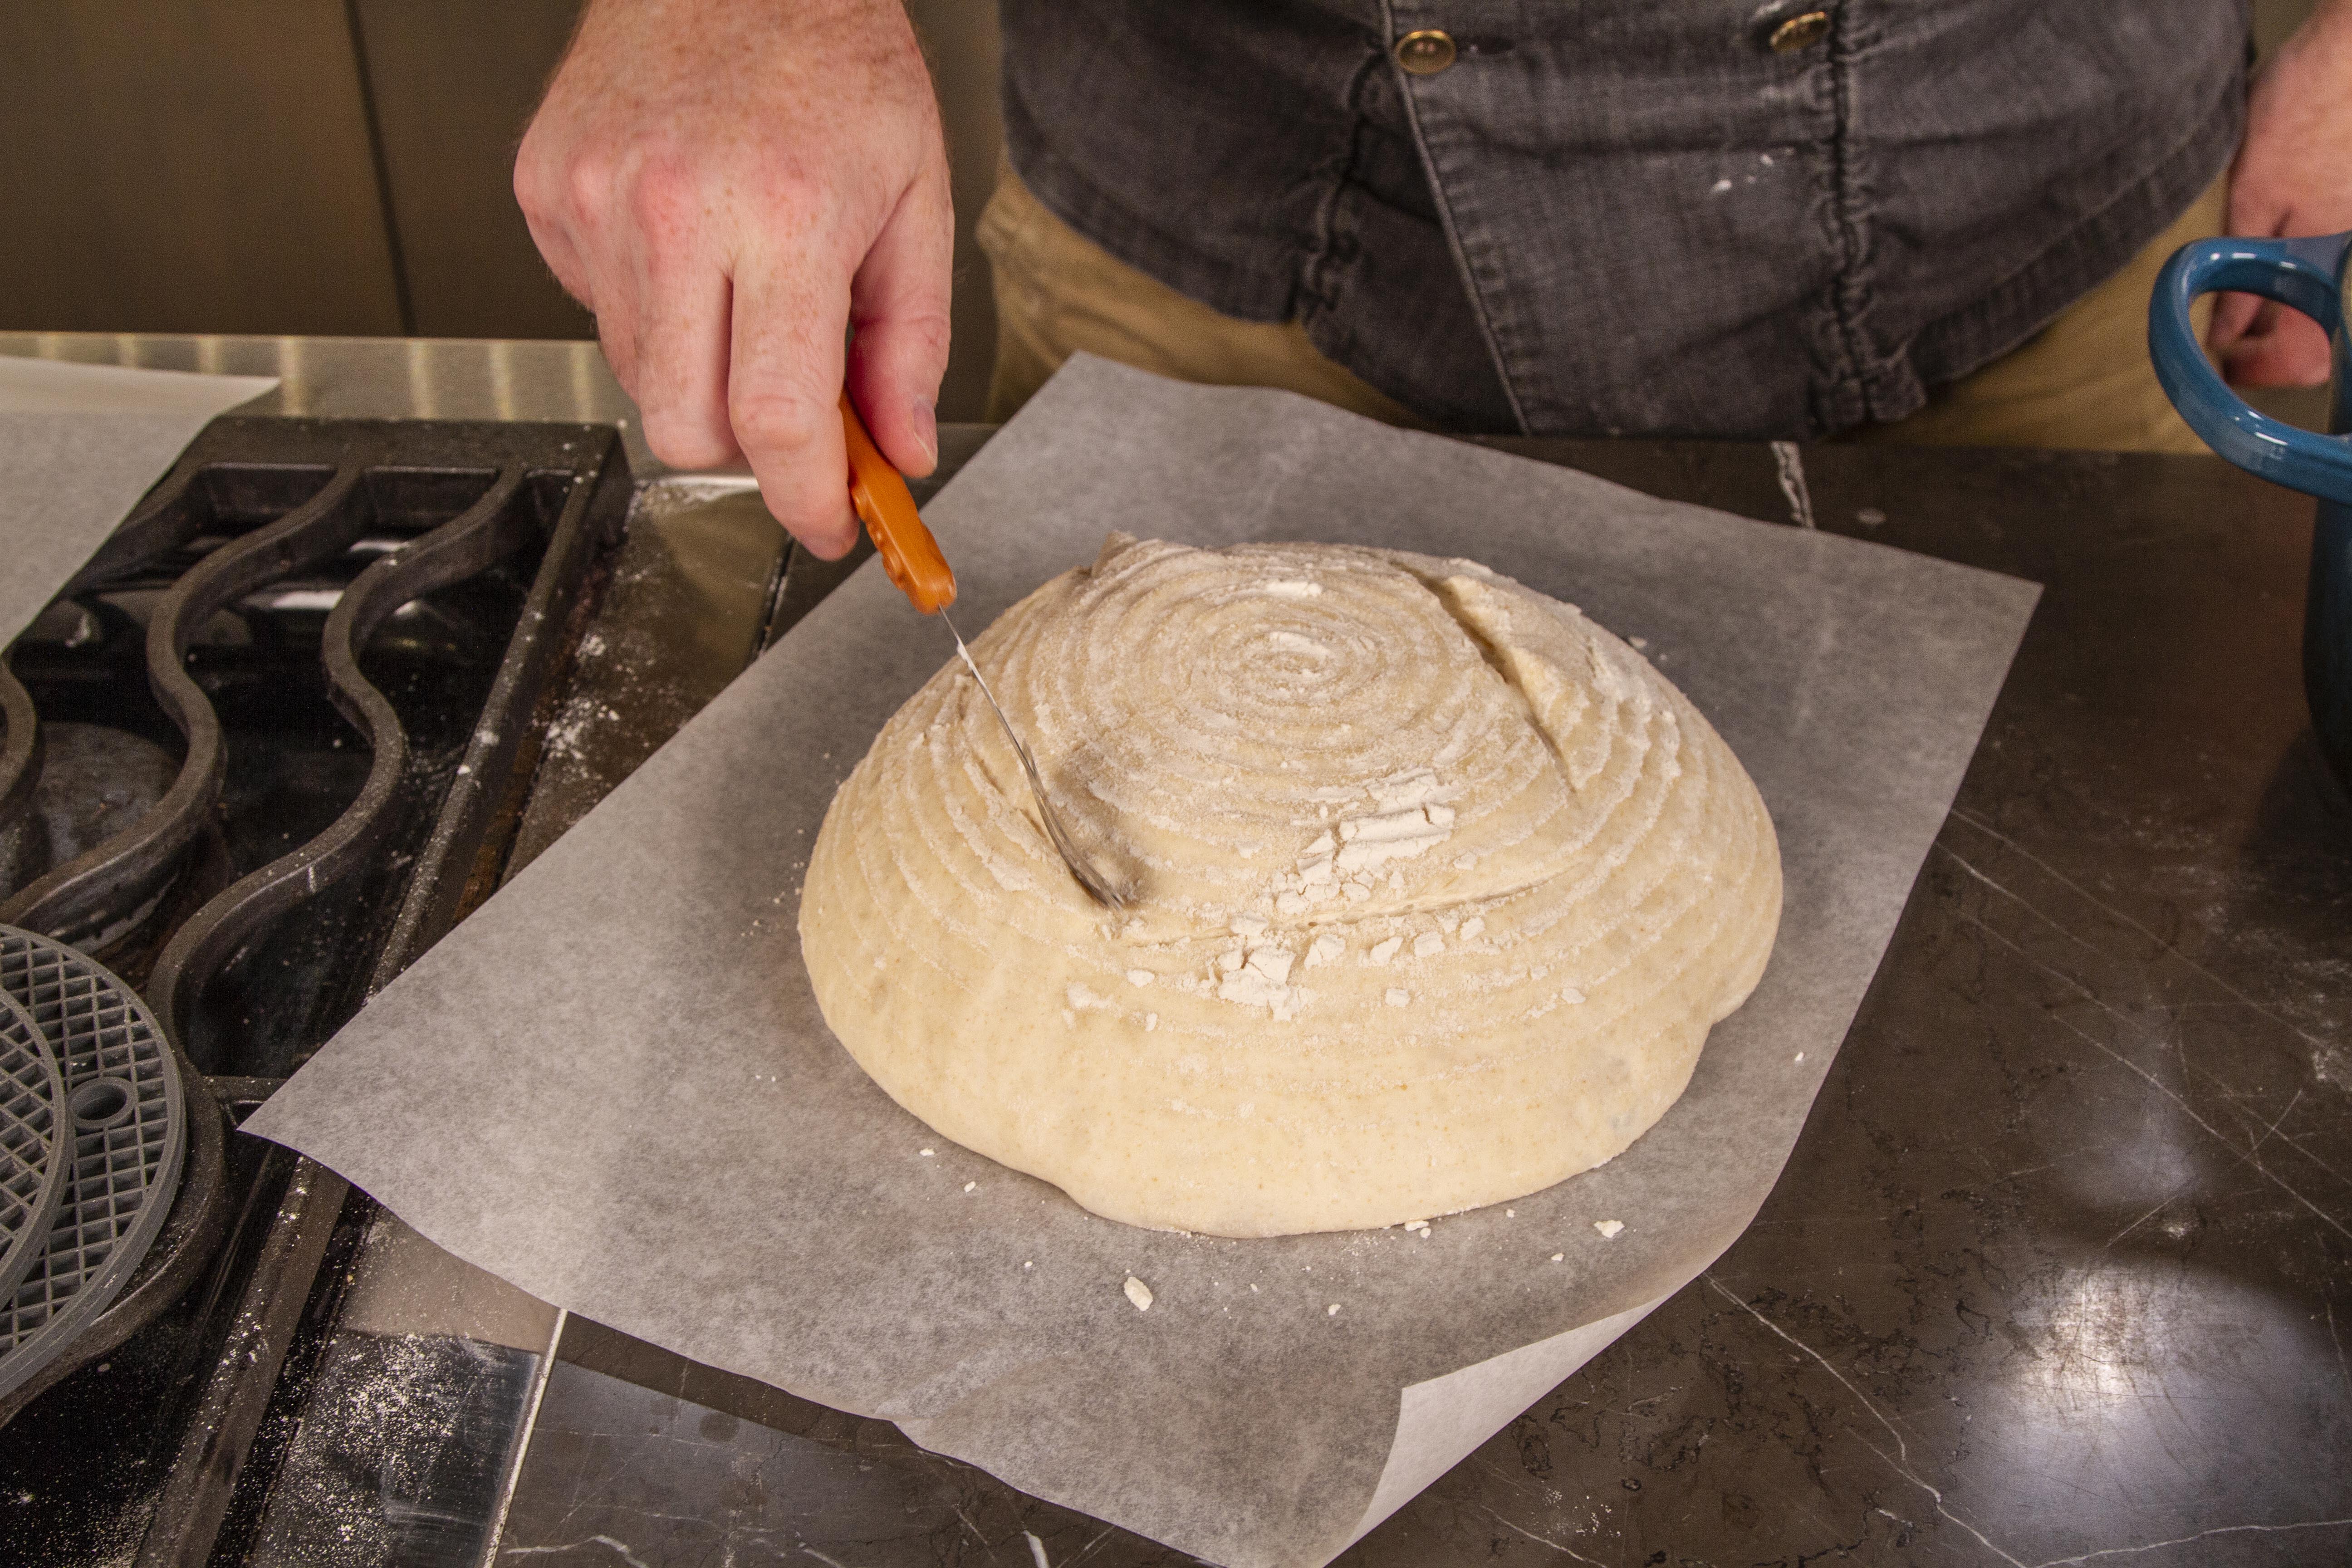 Score the top of the sourdough with a razorblade